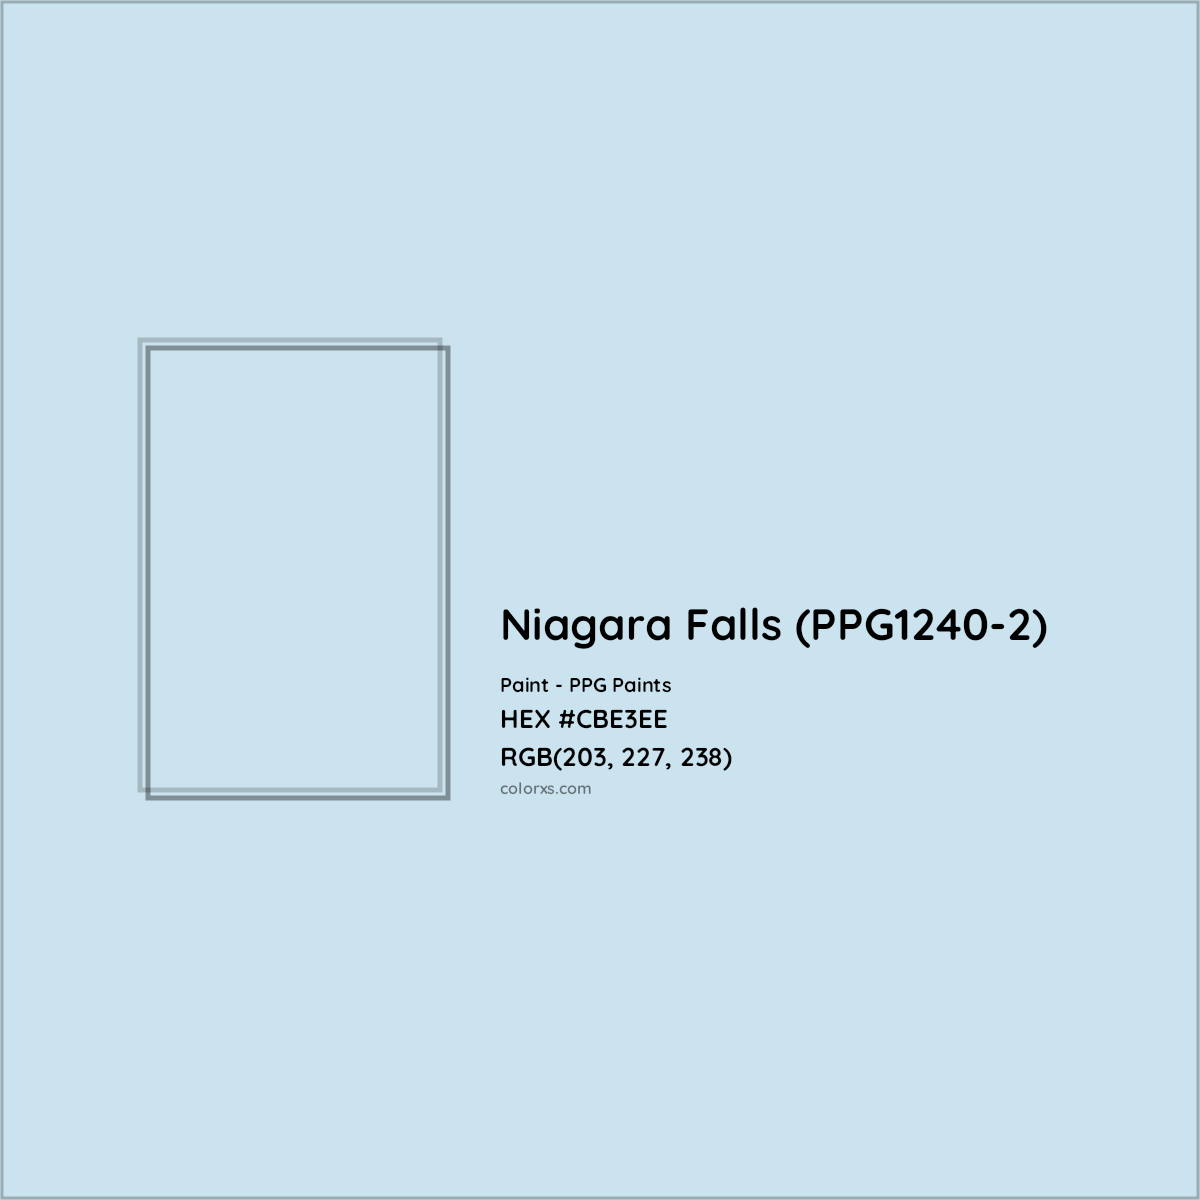 HEX #CBE3EE Niagara Falls (PPG1240-2) Paint PPG Paints - Color Code